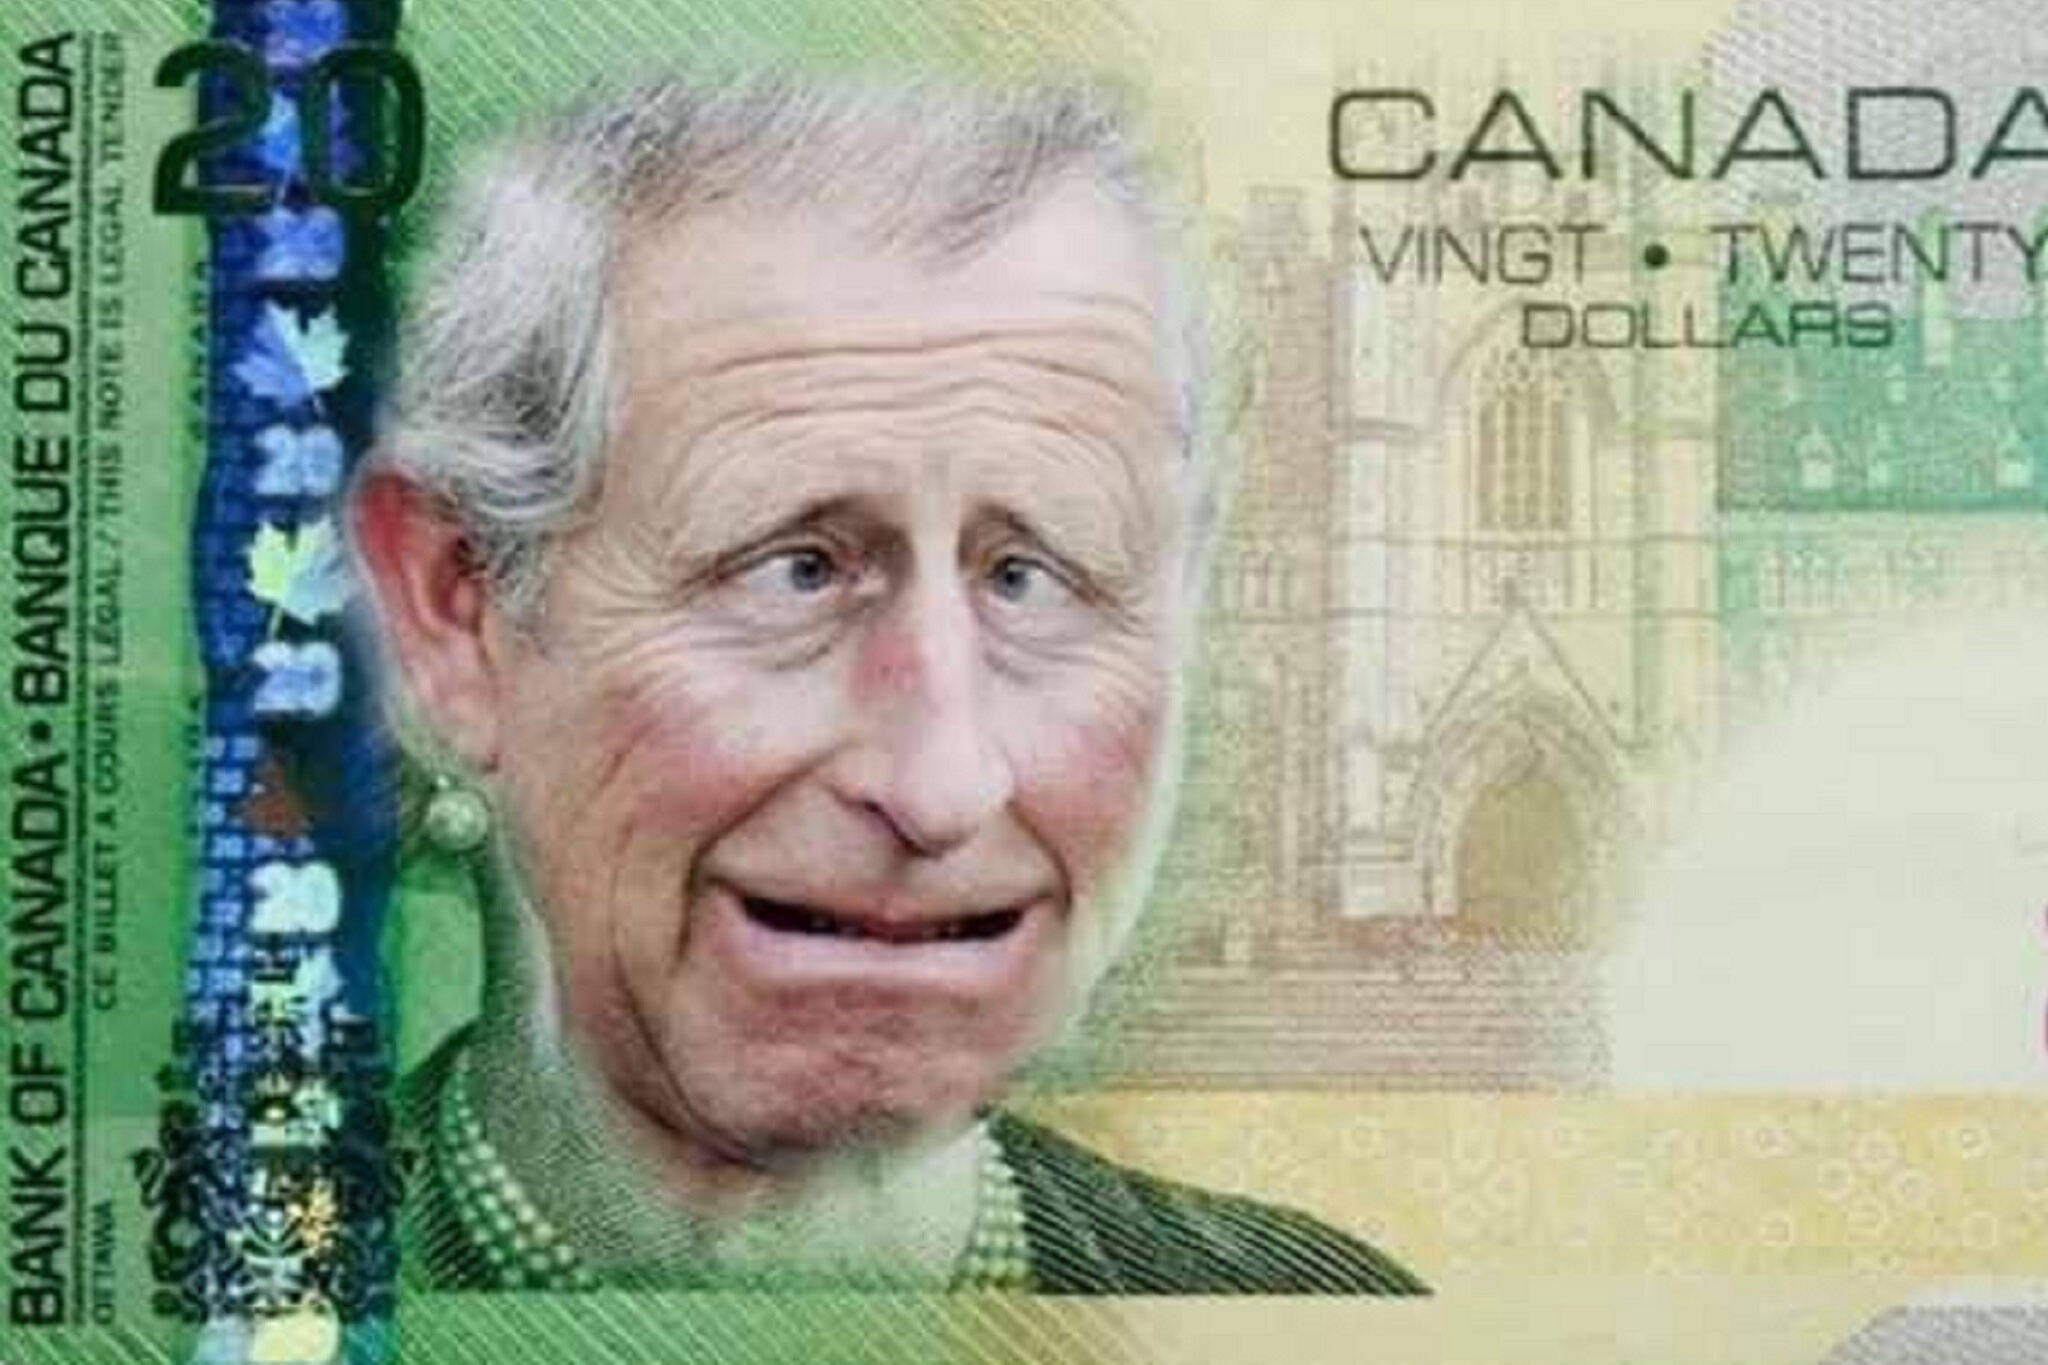 Canadians come up with new 20 bill designs to replace Queen Elizabeth II